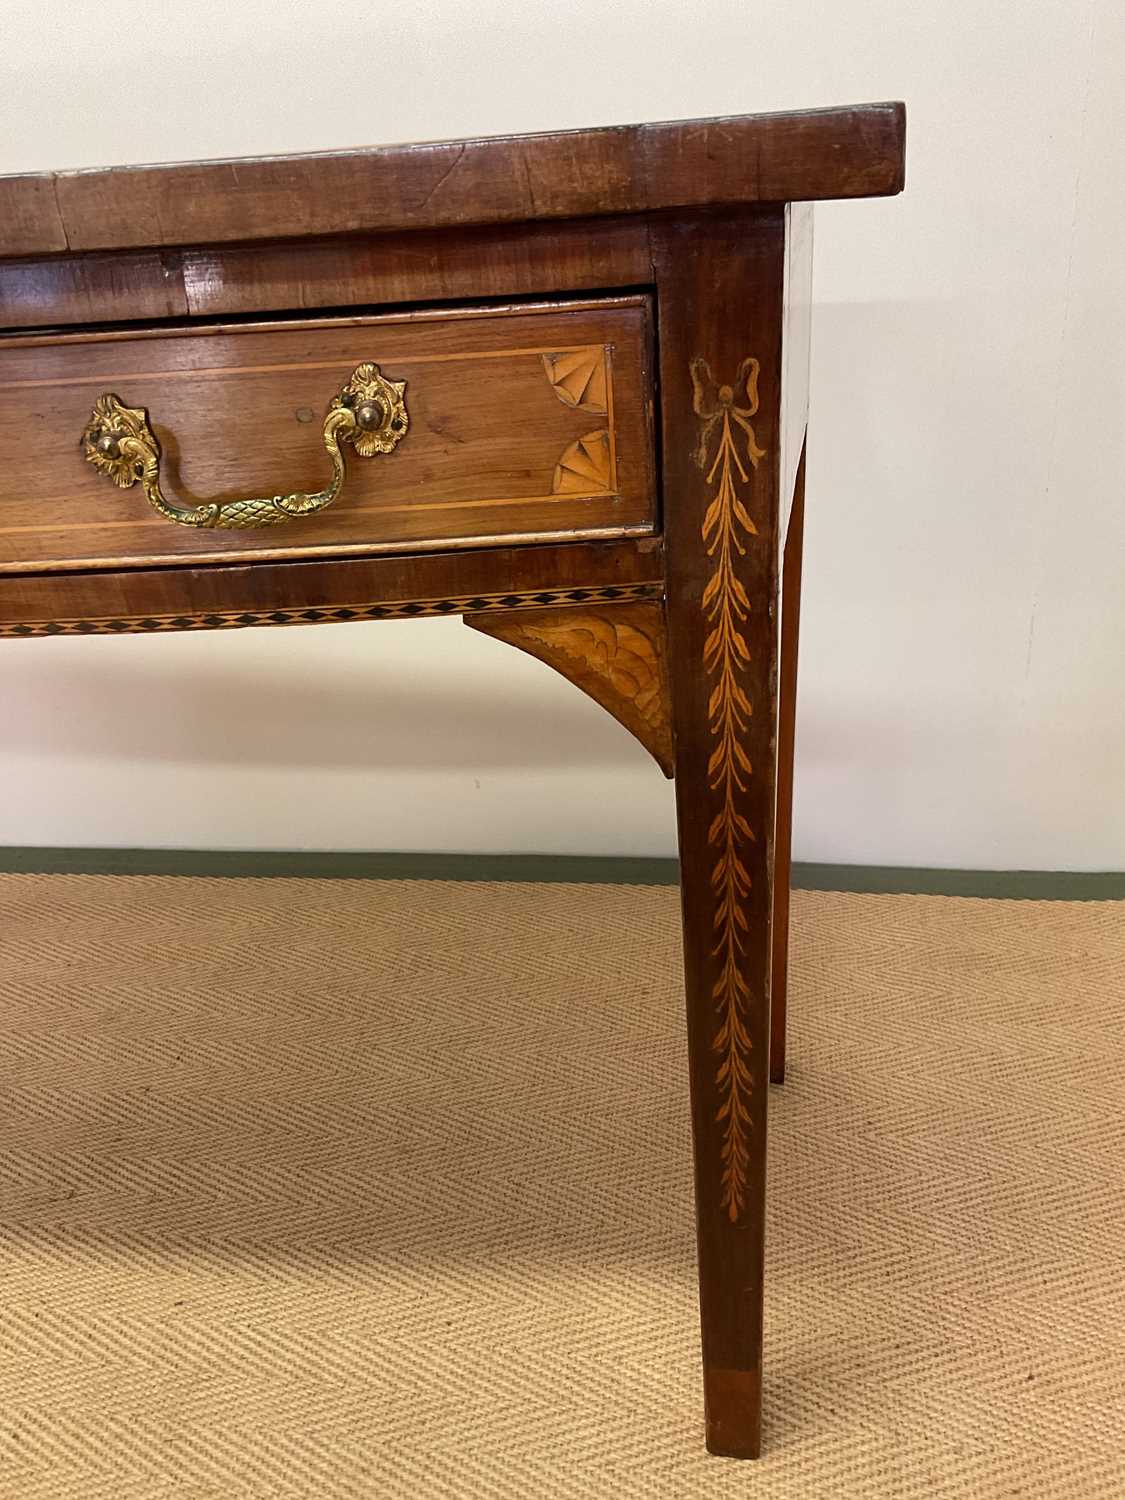 An early 19th century mahogany and inlaid bowfronted serving table with two frieze drawers raised on - Image 6 of 6